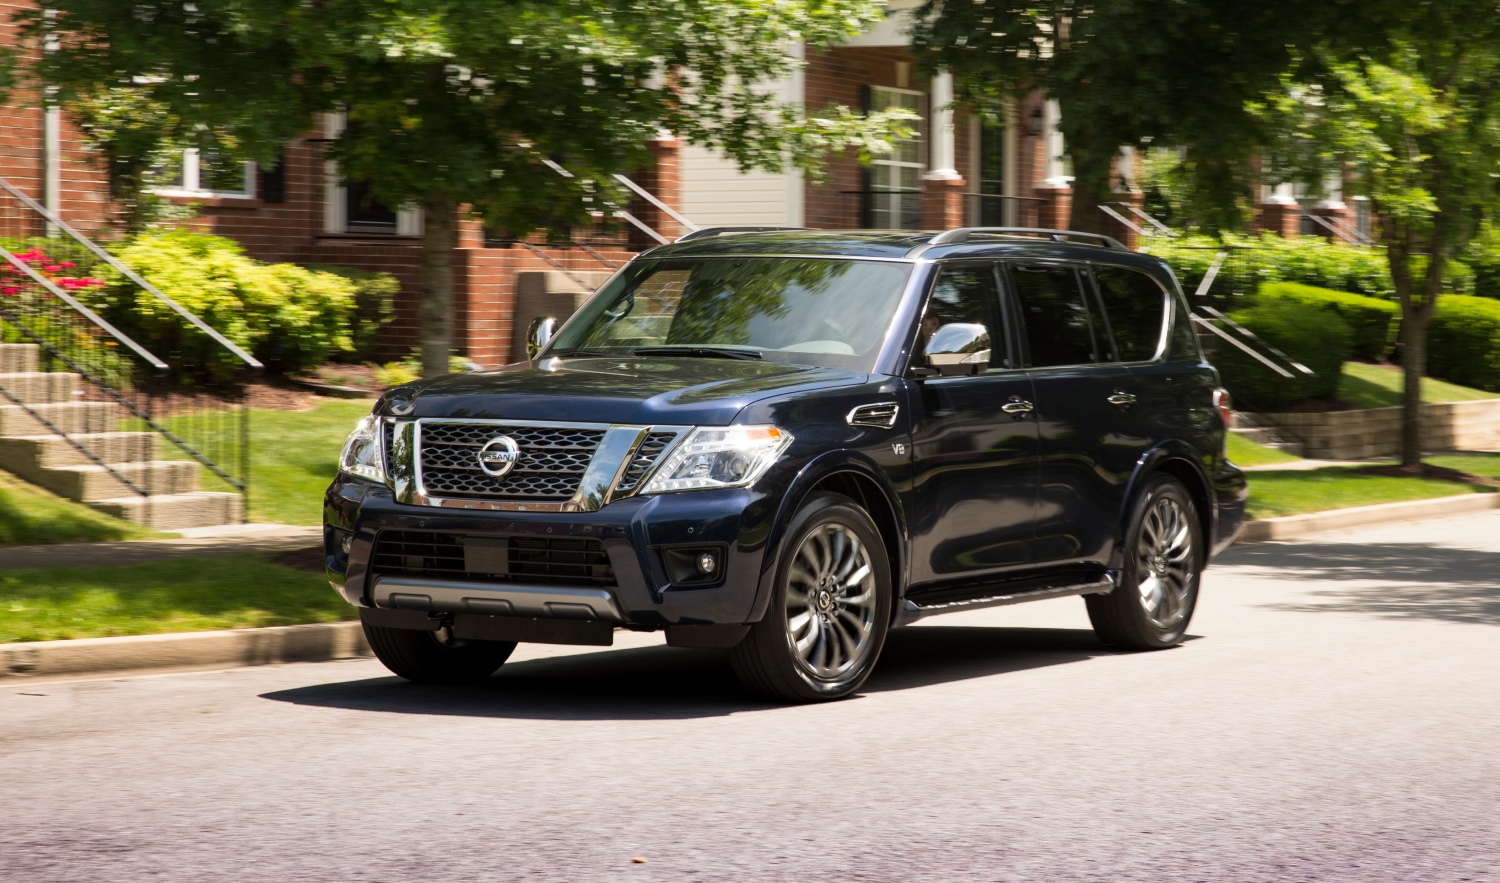 The best 2020 family SUVs in quality include this Nissan Armada